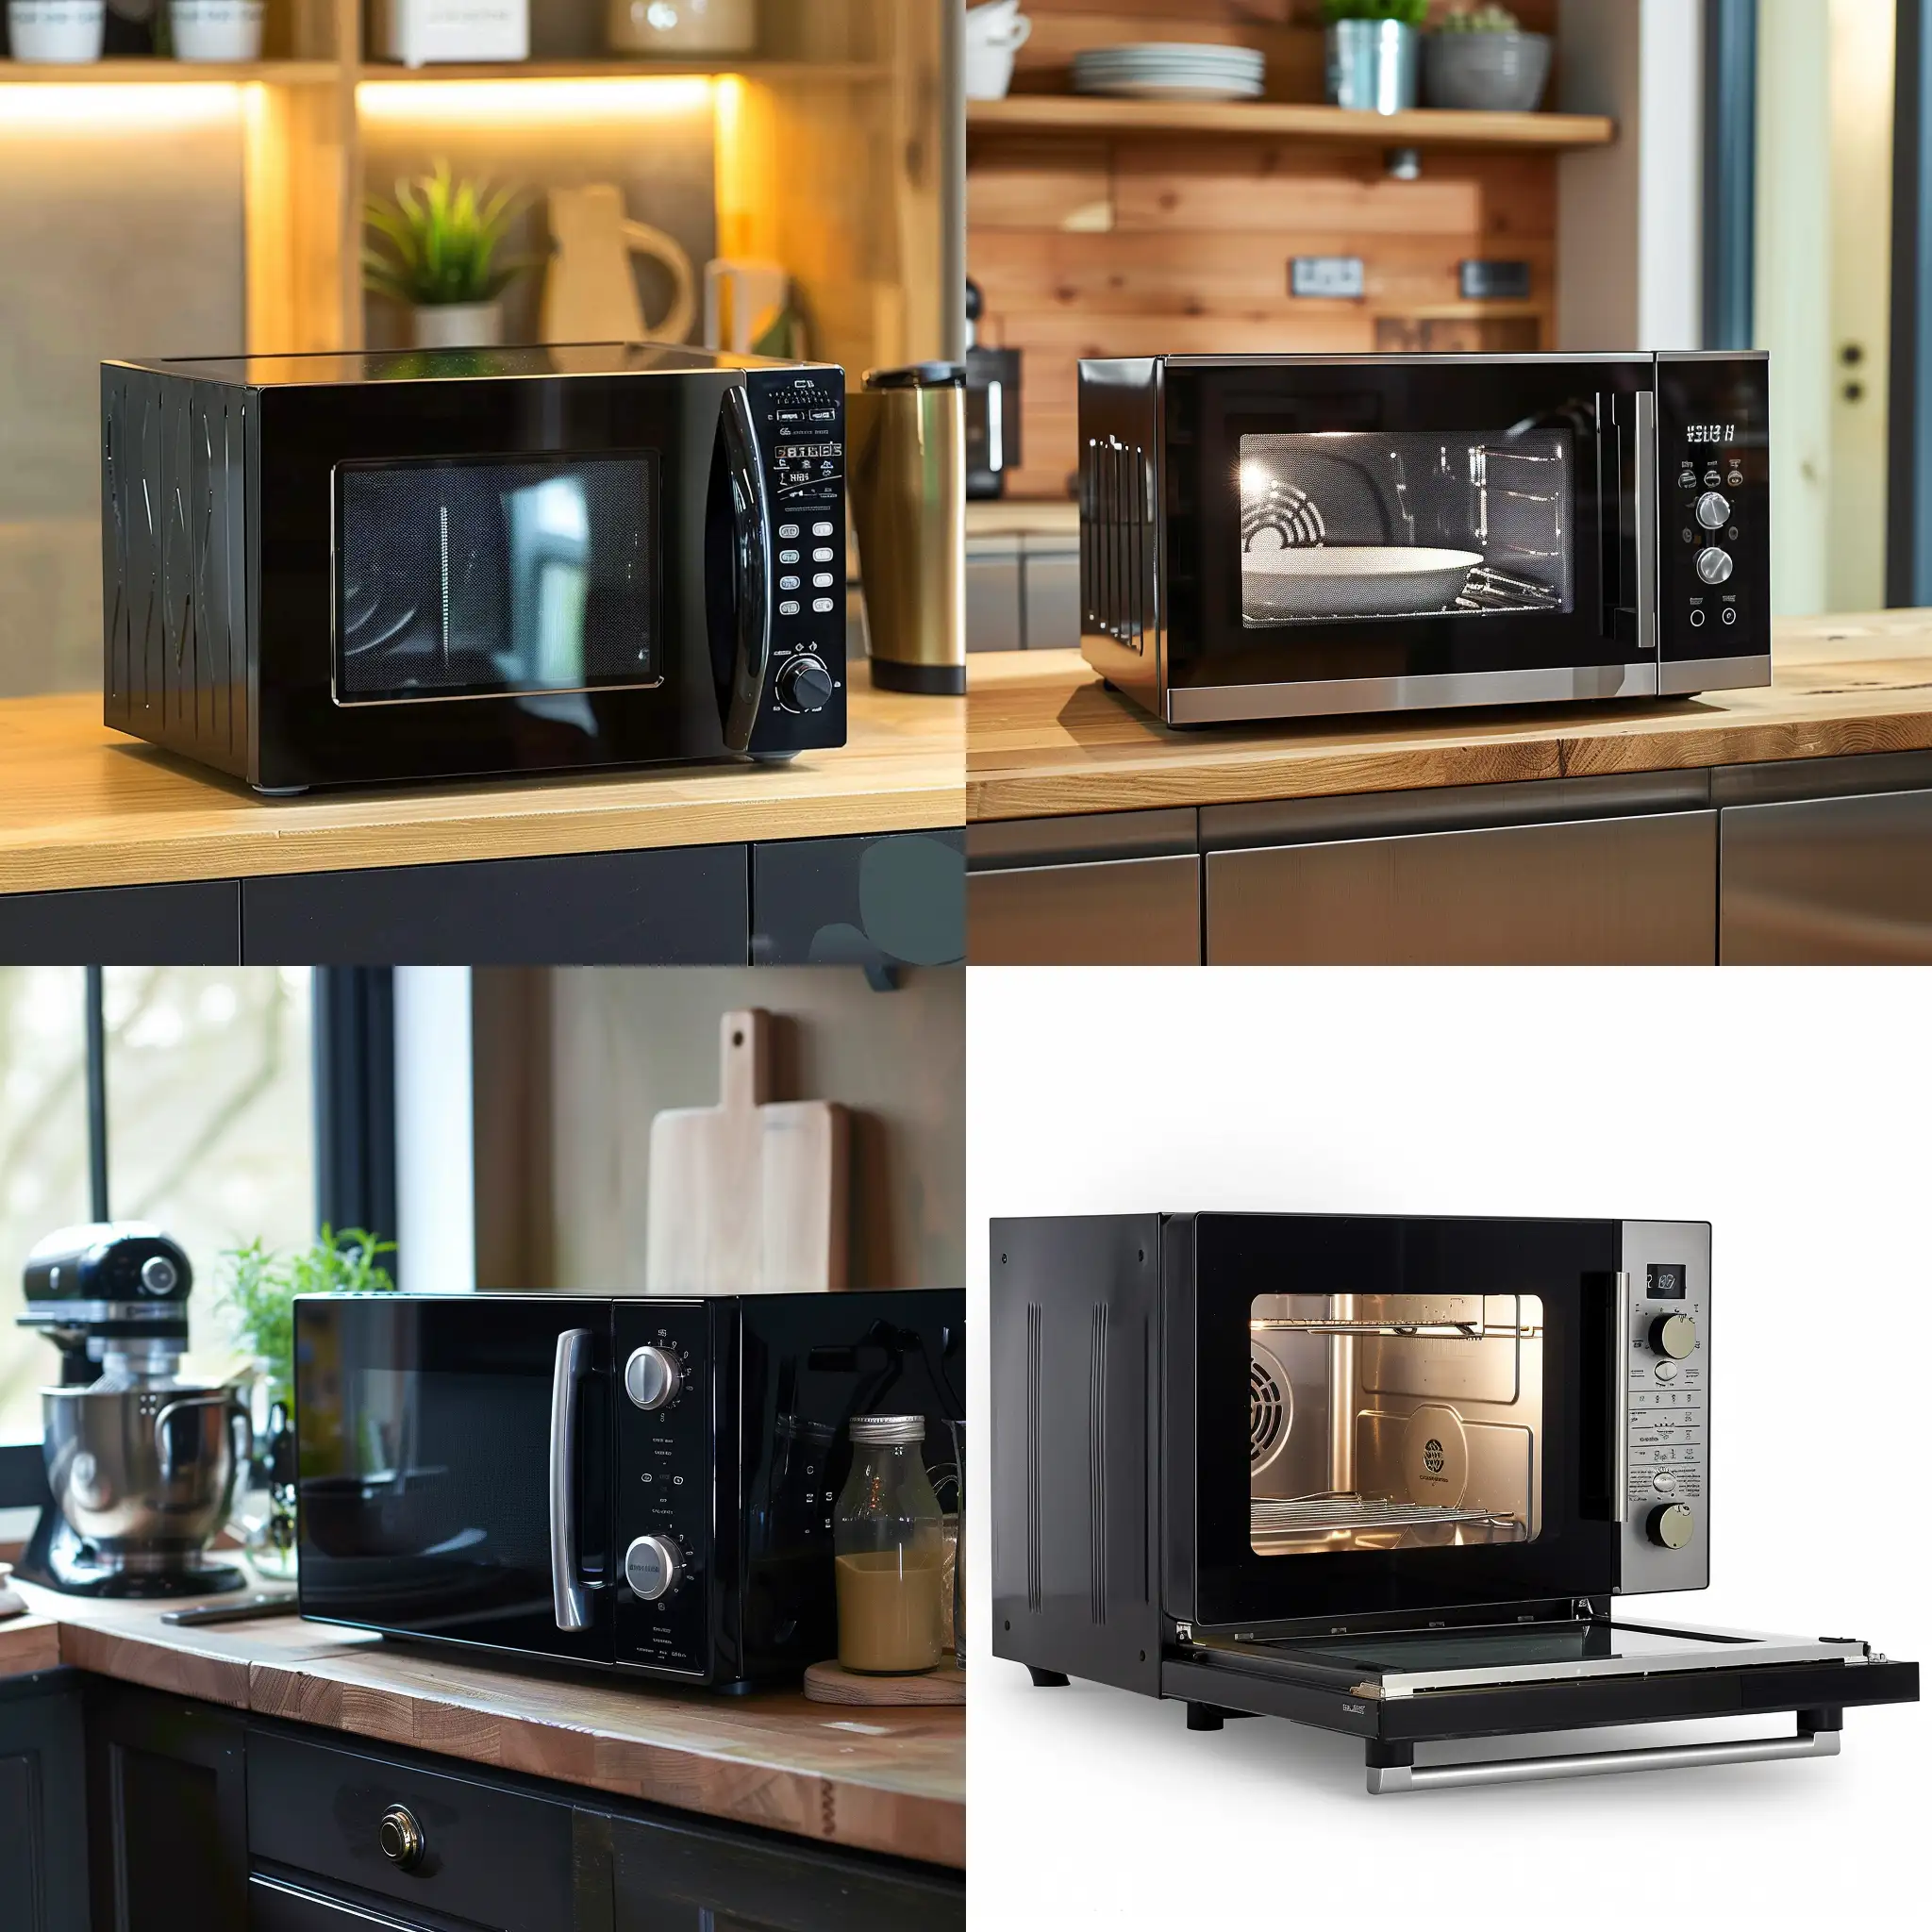 Modern-Microwave-Oven-with-Digital-Display-and-Touch-Controls